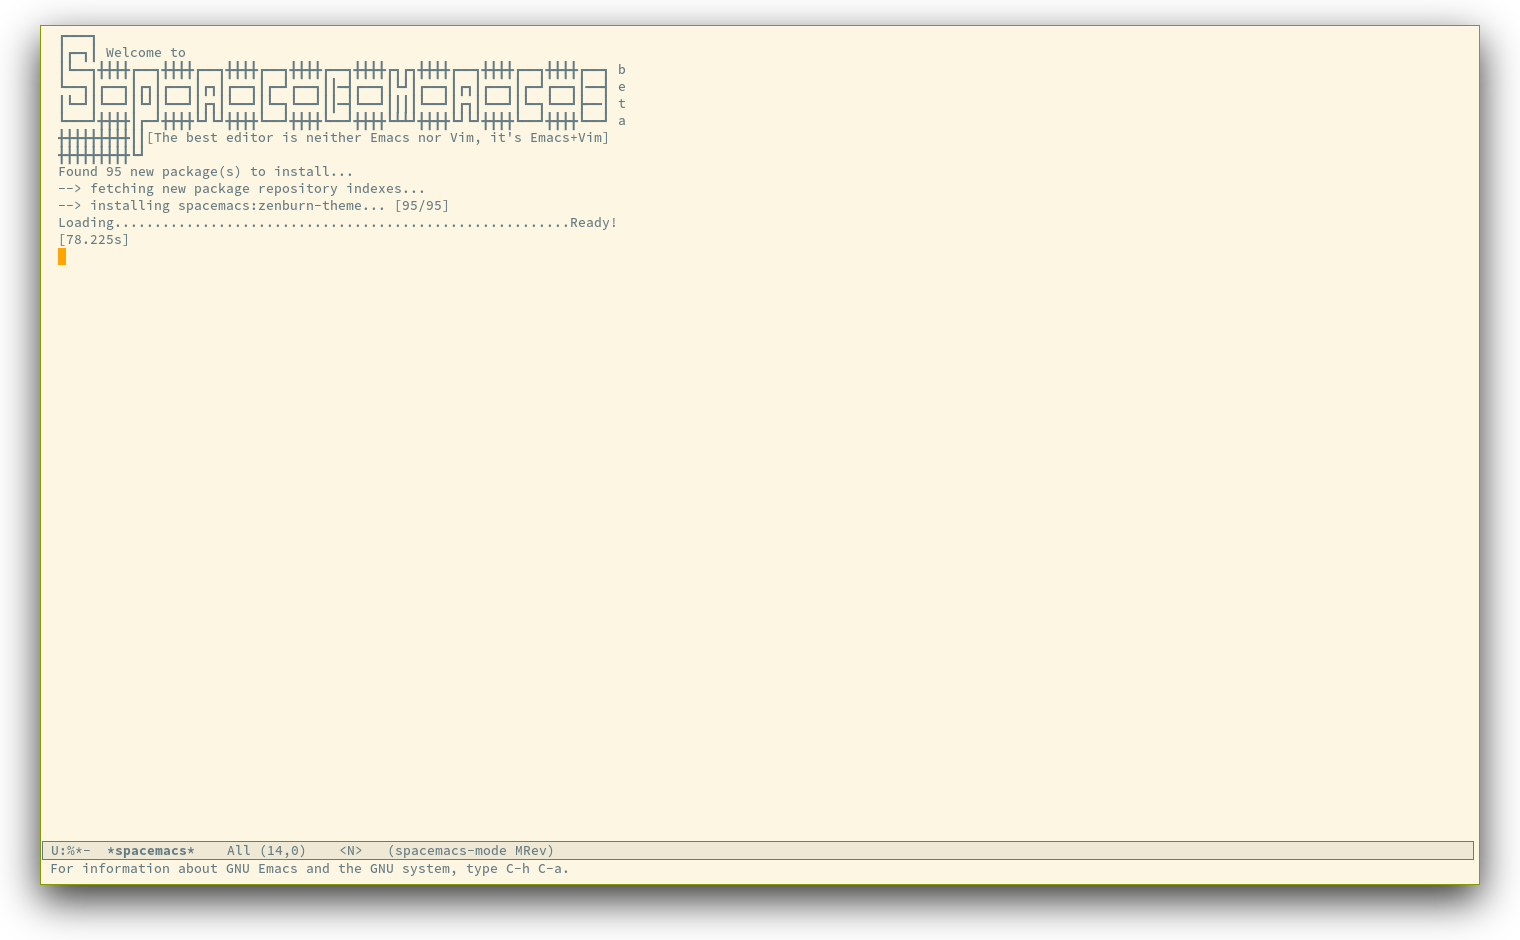 /TakeV/spacemacs/media/commit/f53620a1c8ad72c51d40942c169a3afe779f5088/doc/img/spacemacs-startup.png